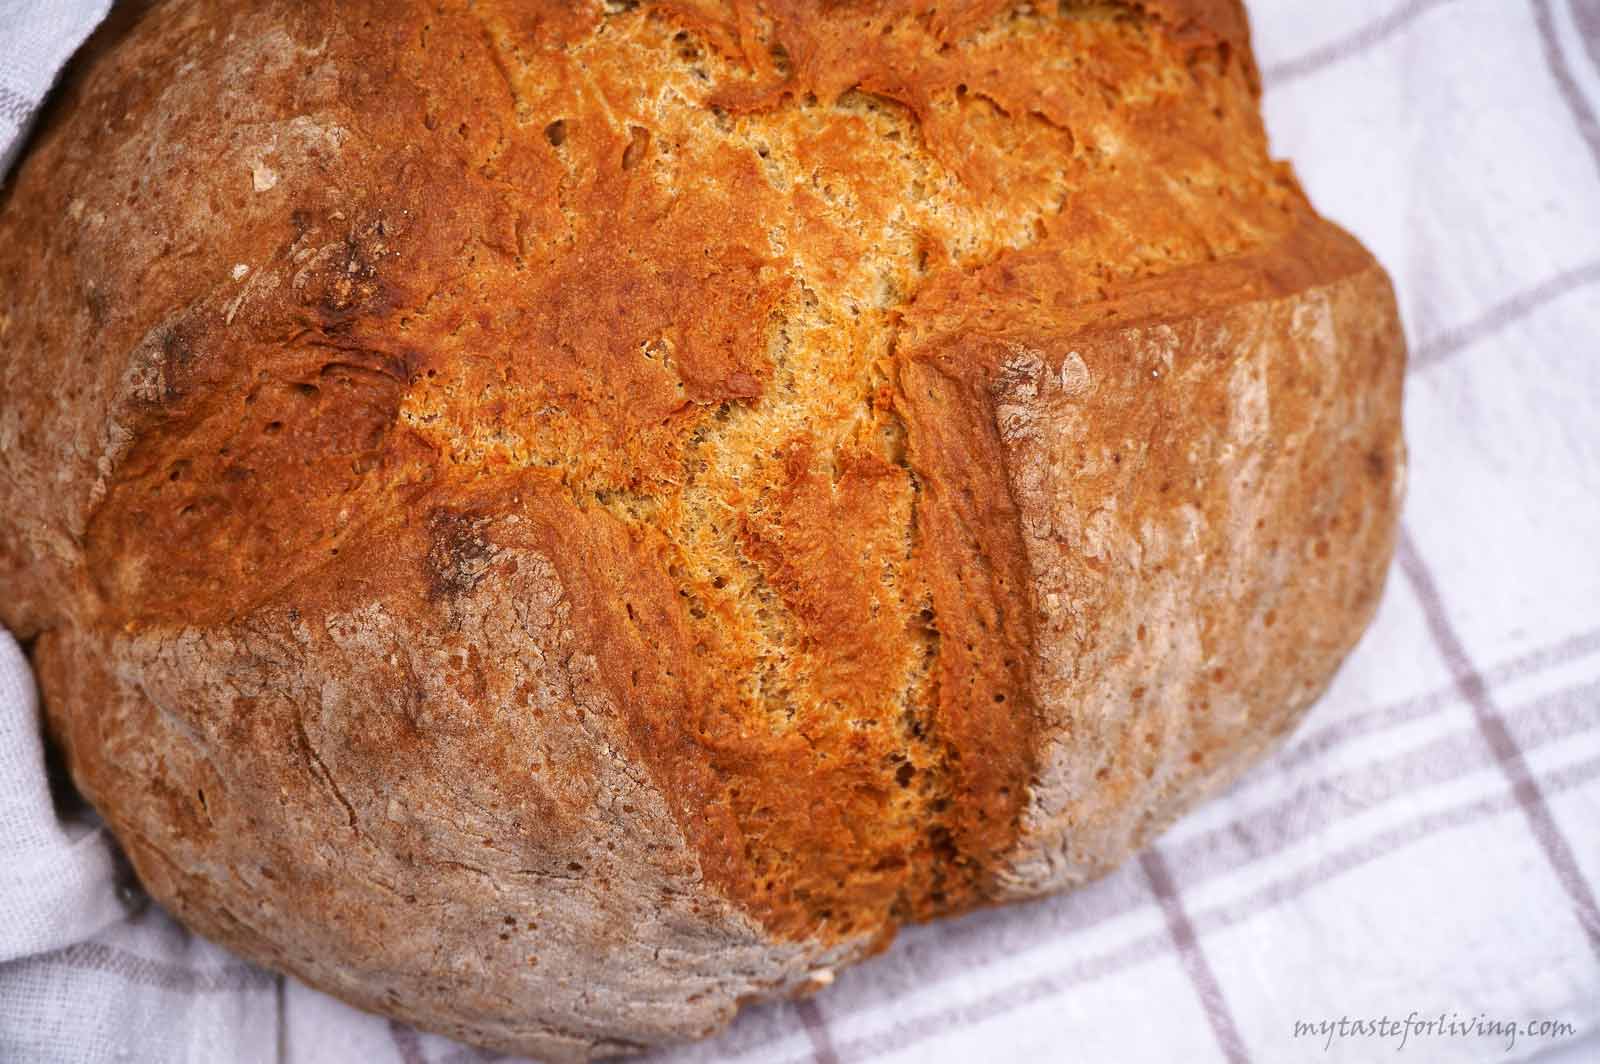 Traditional Irish bread is made from four ingredients - soft wheat flour (low in gluten), baking soda, salt and buttermilk (or kefir). It is prepared extremely easily and quickly - all the ingredients are mixed and the dough is obtained without much effort, and after baking the bread is delicious, fragrant and with an appetizing crust.